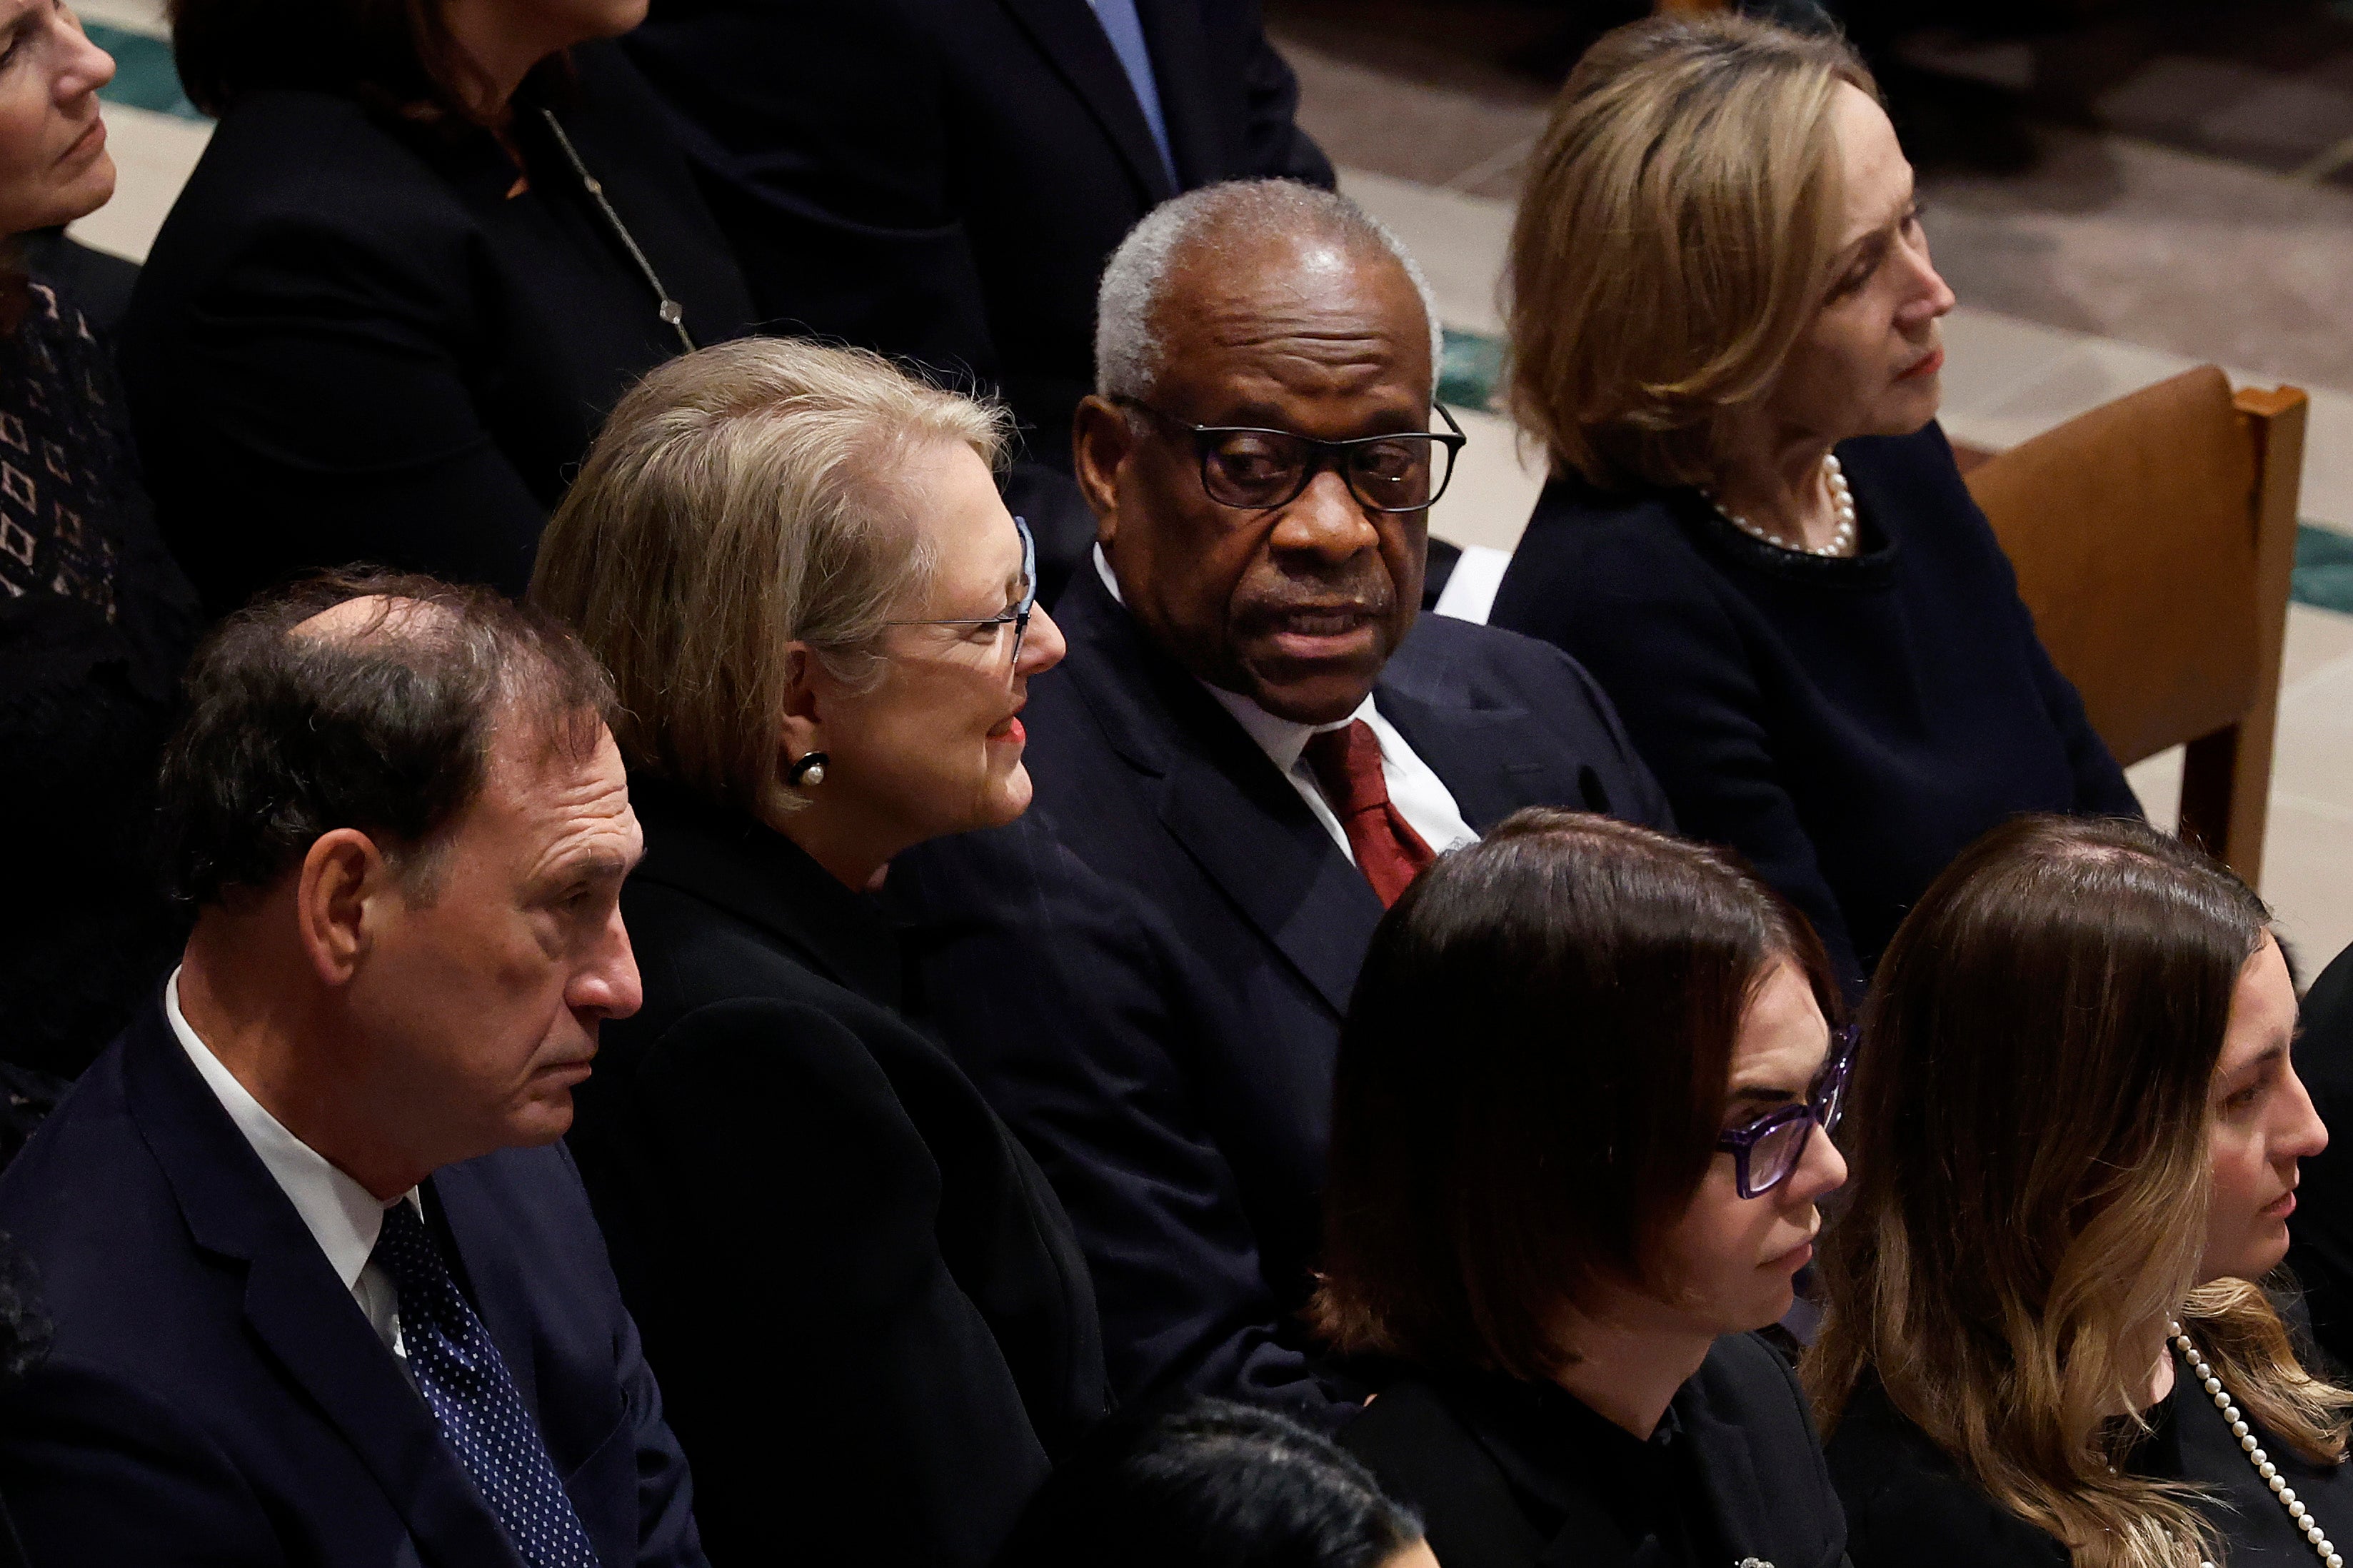 US Supreme Court Justice Clarence Thomas, centre, speaks with his wife Ginni Thomas, seated next to Justice Samuel Alito, at Sandra Day O’Connor’s funeral on 19 December.